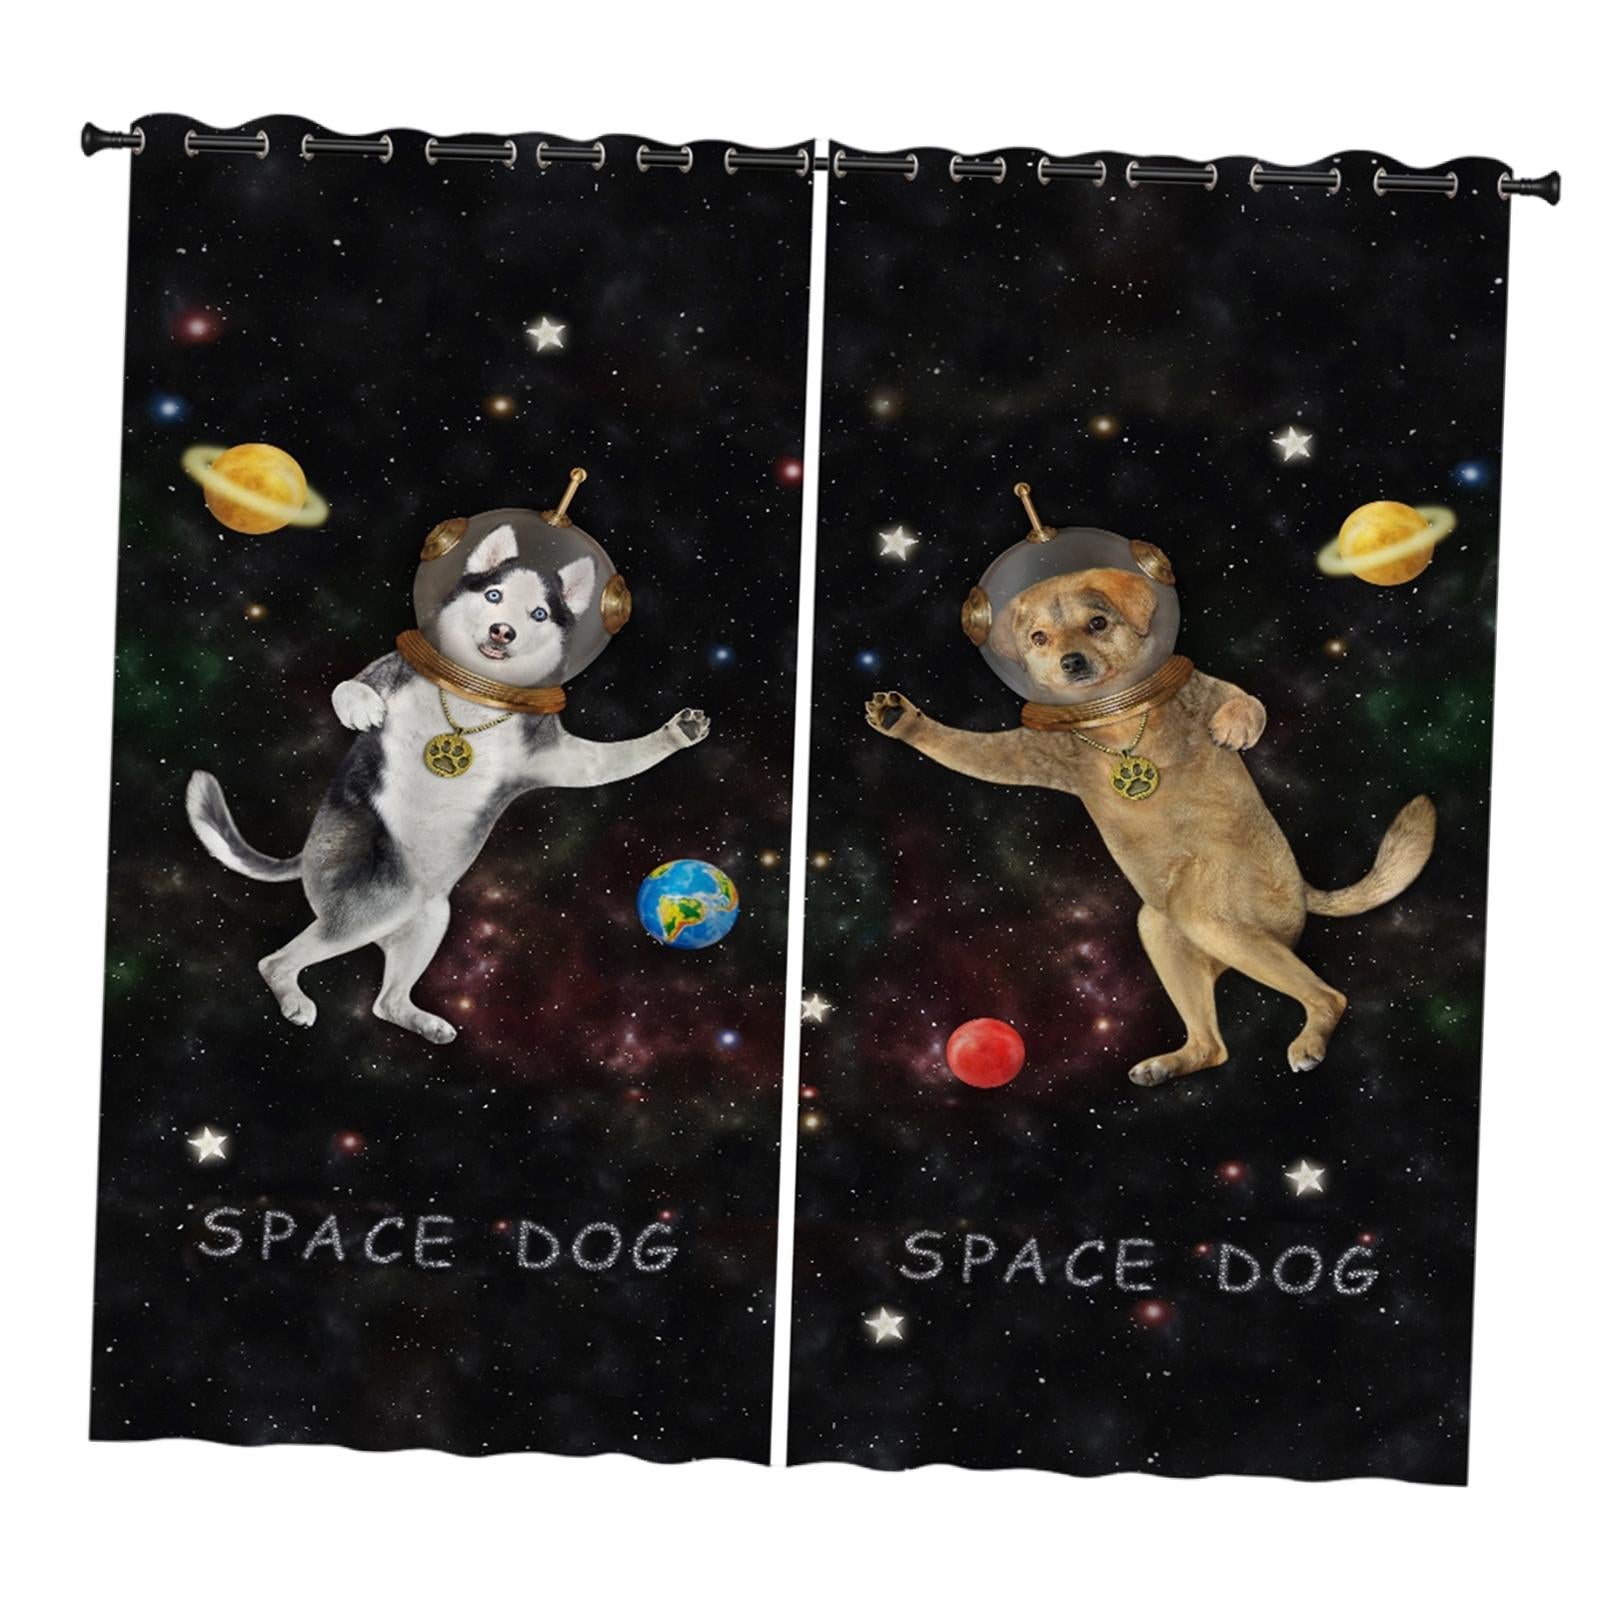 2x Waterproof Bath Curtain for Hotel Bedroom Living Room Space Dog 150x166cm